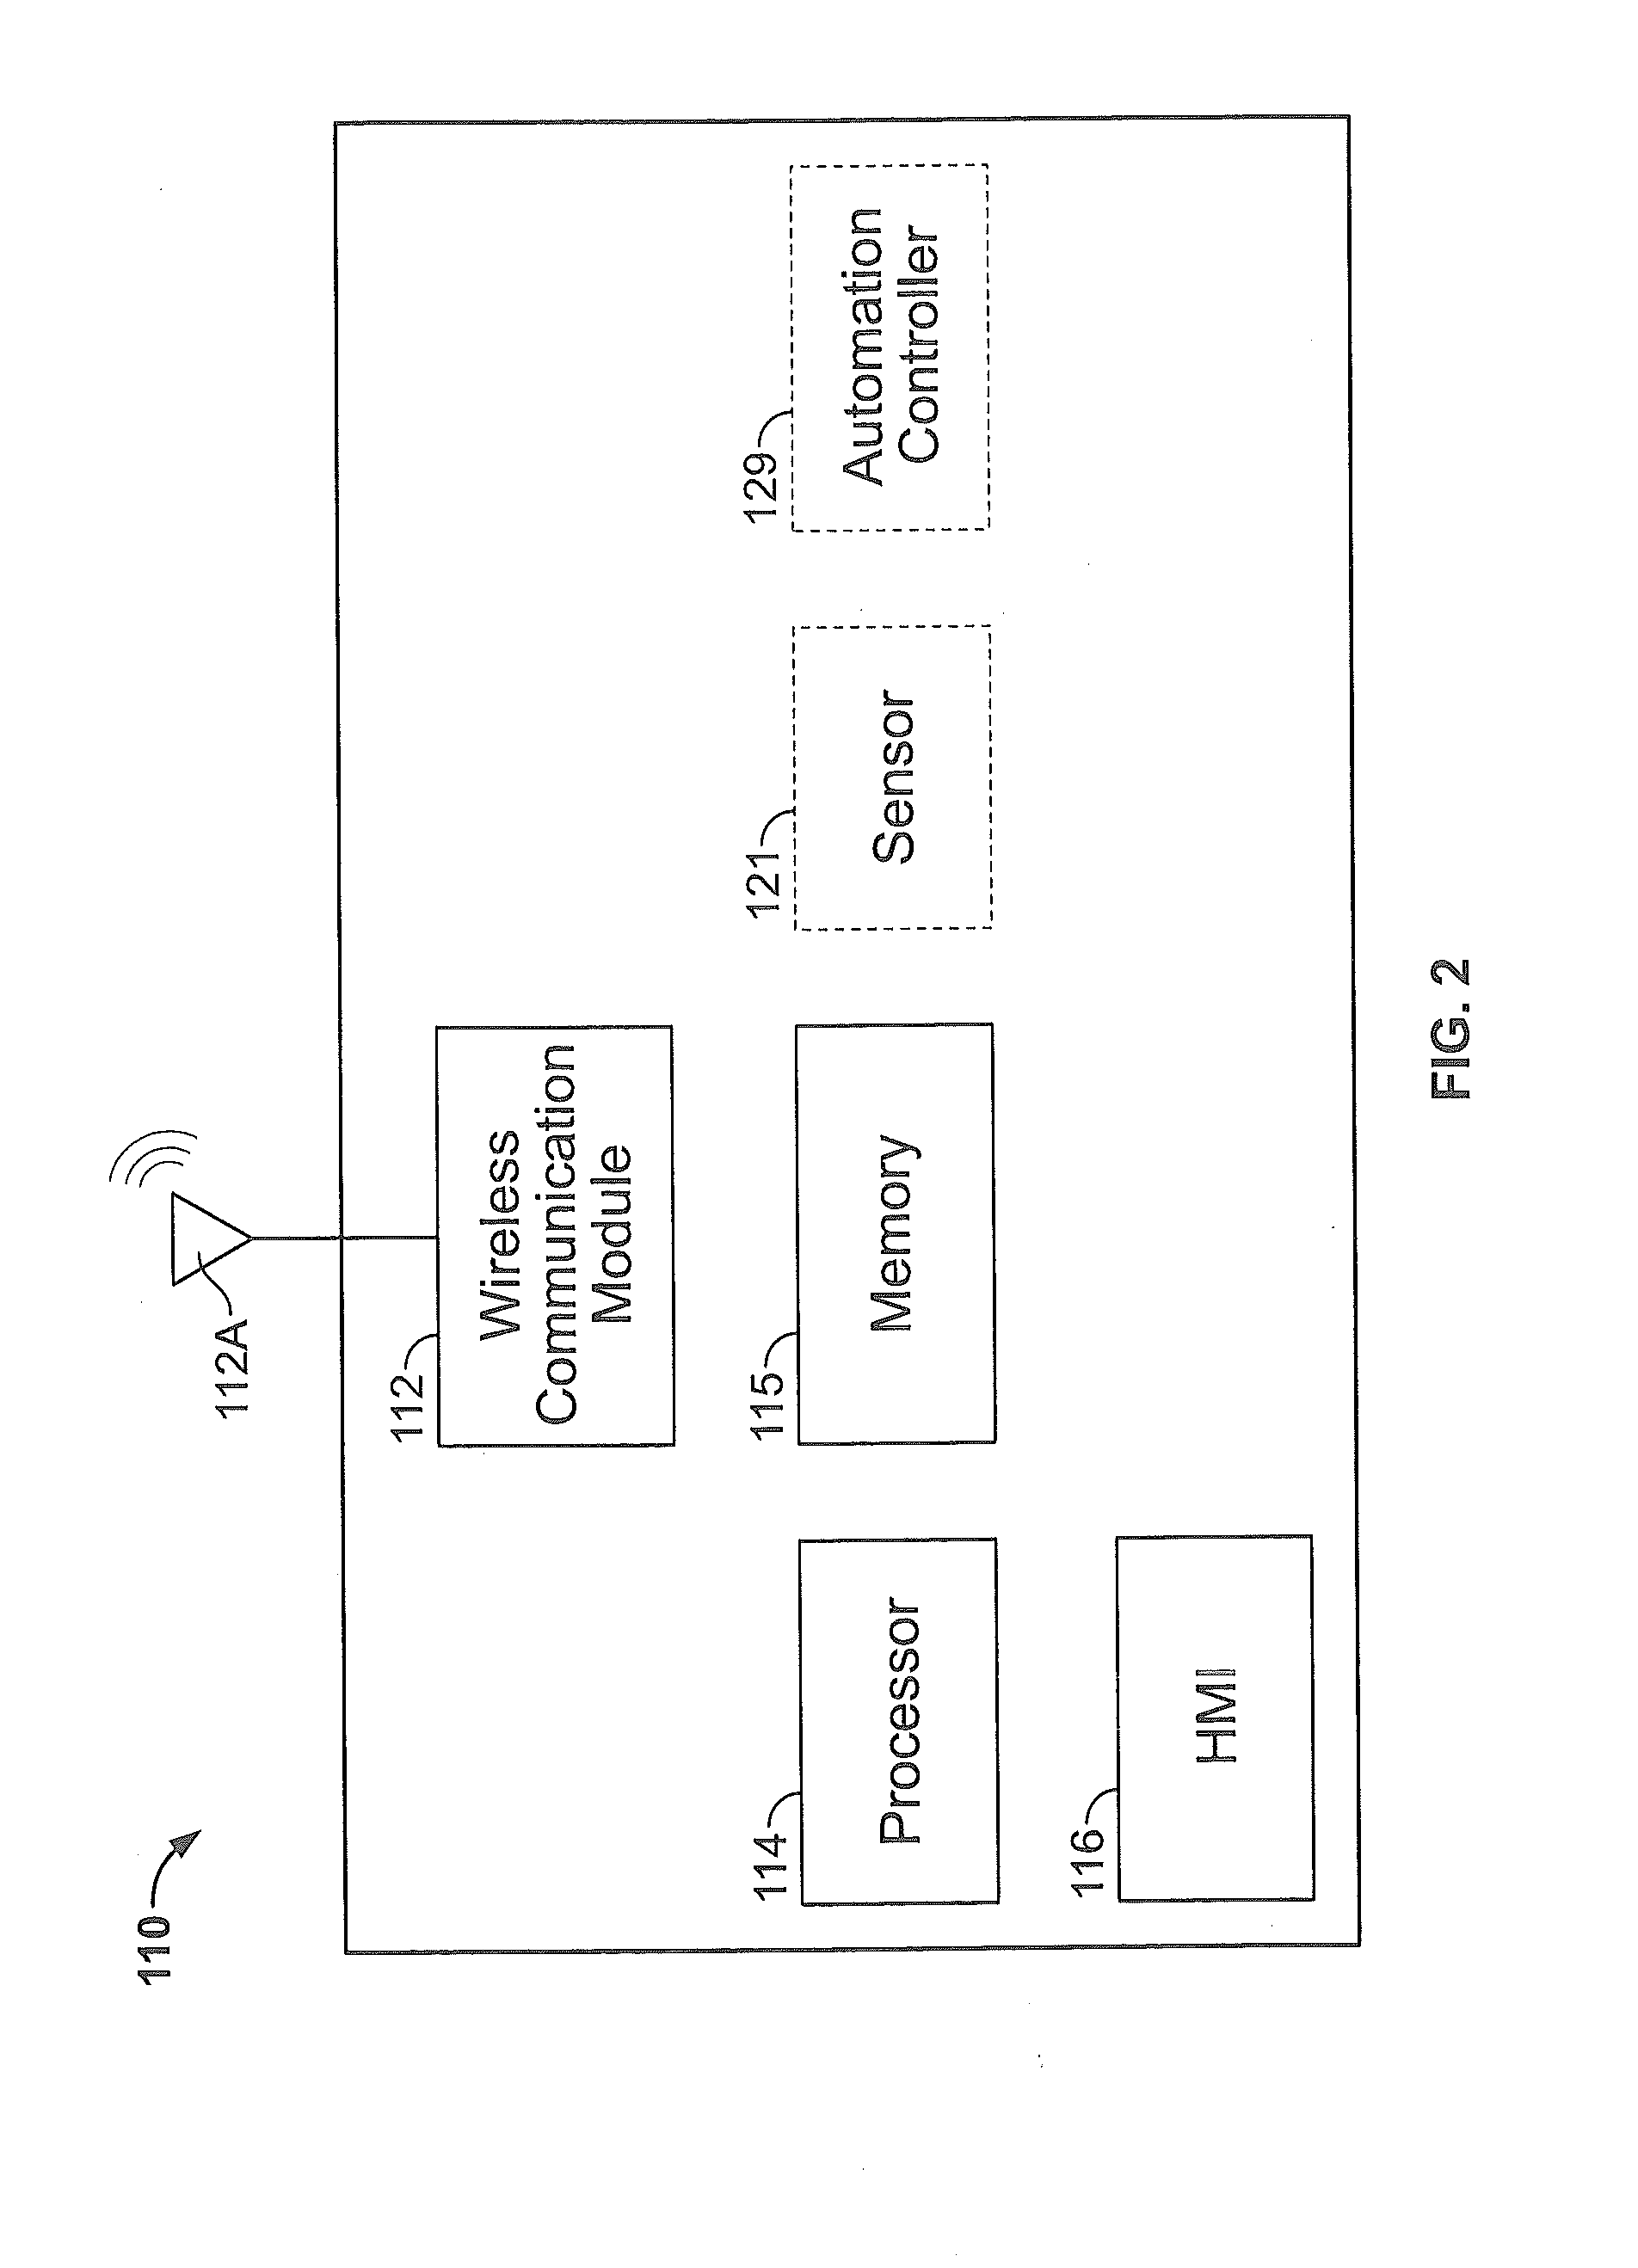 Environmental management systems including mobile robots and methods using same